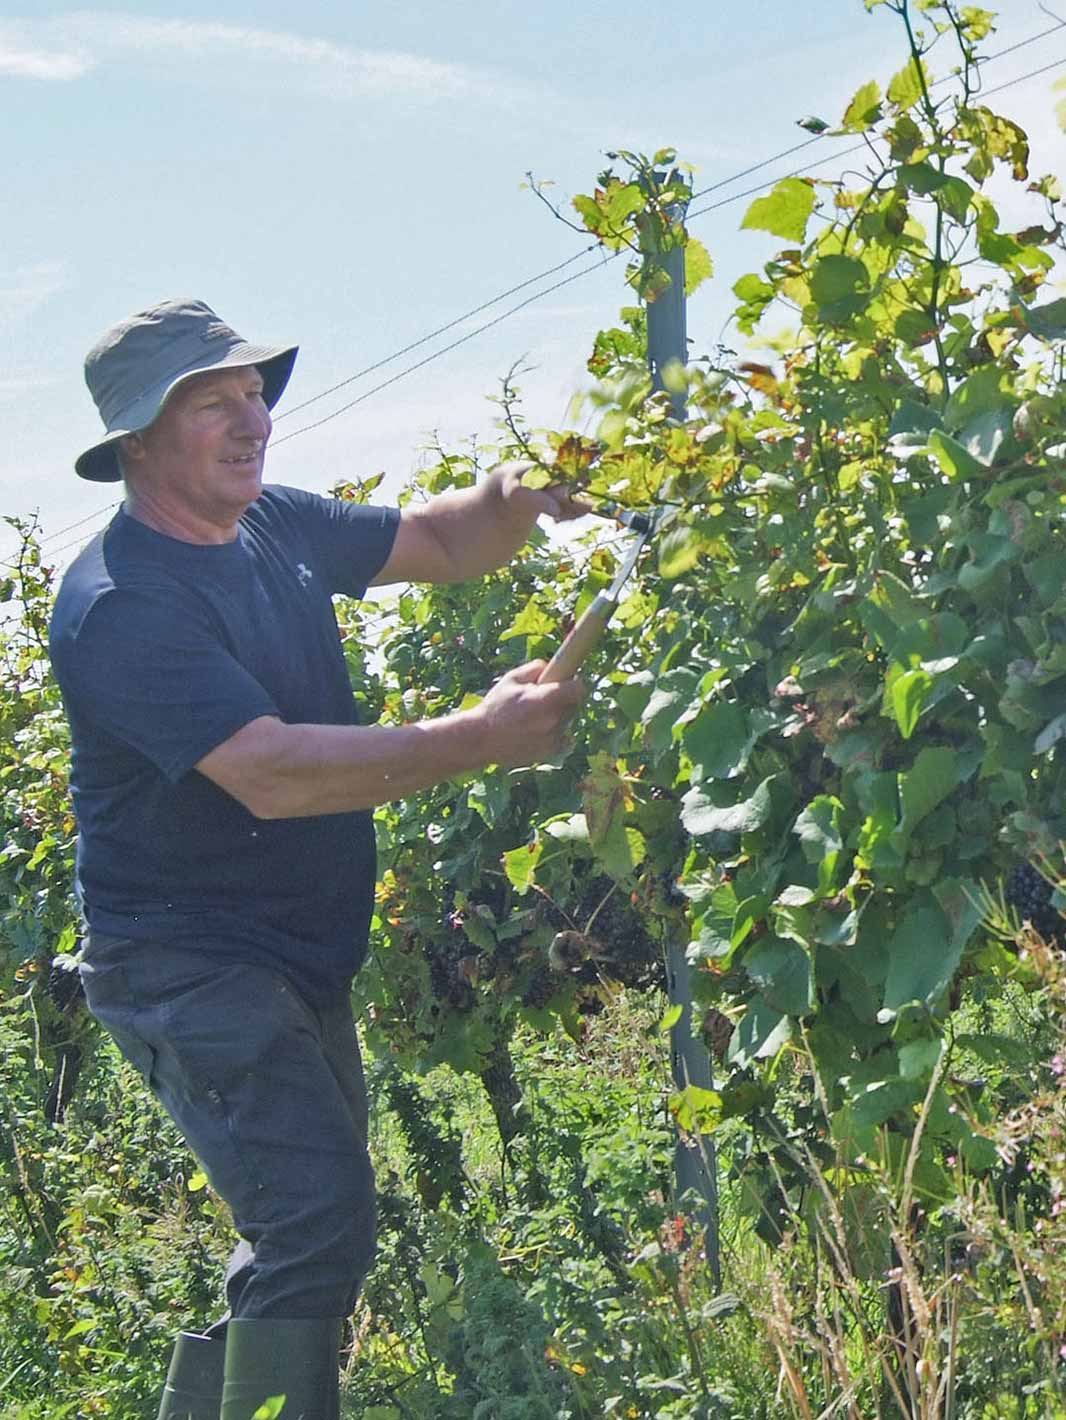 Plucking the vines at at Knightor Vineyard in Portscatho, the Roseland